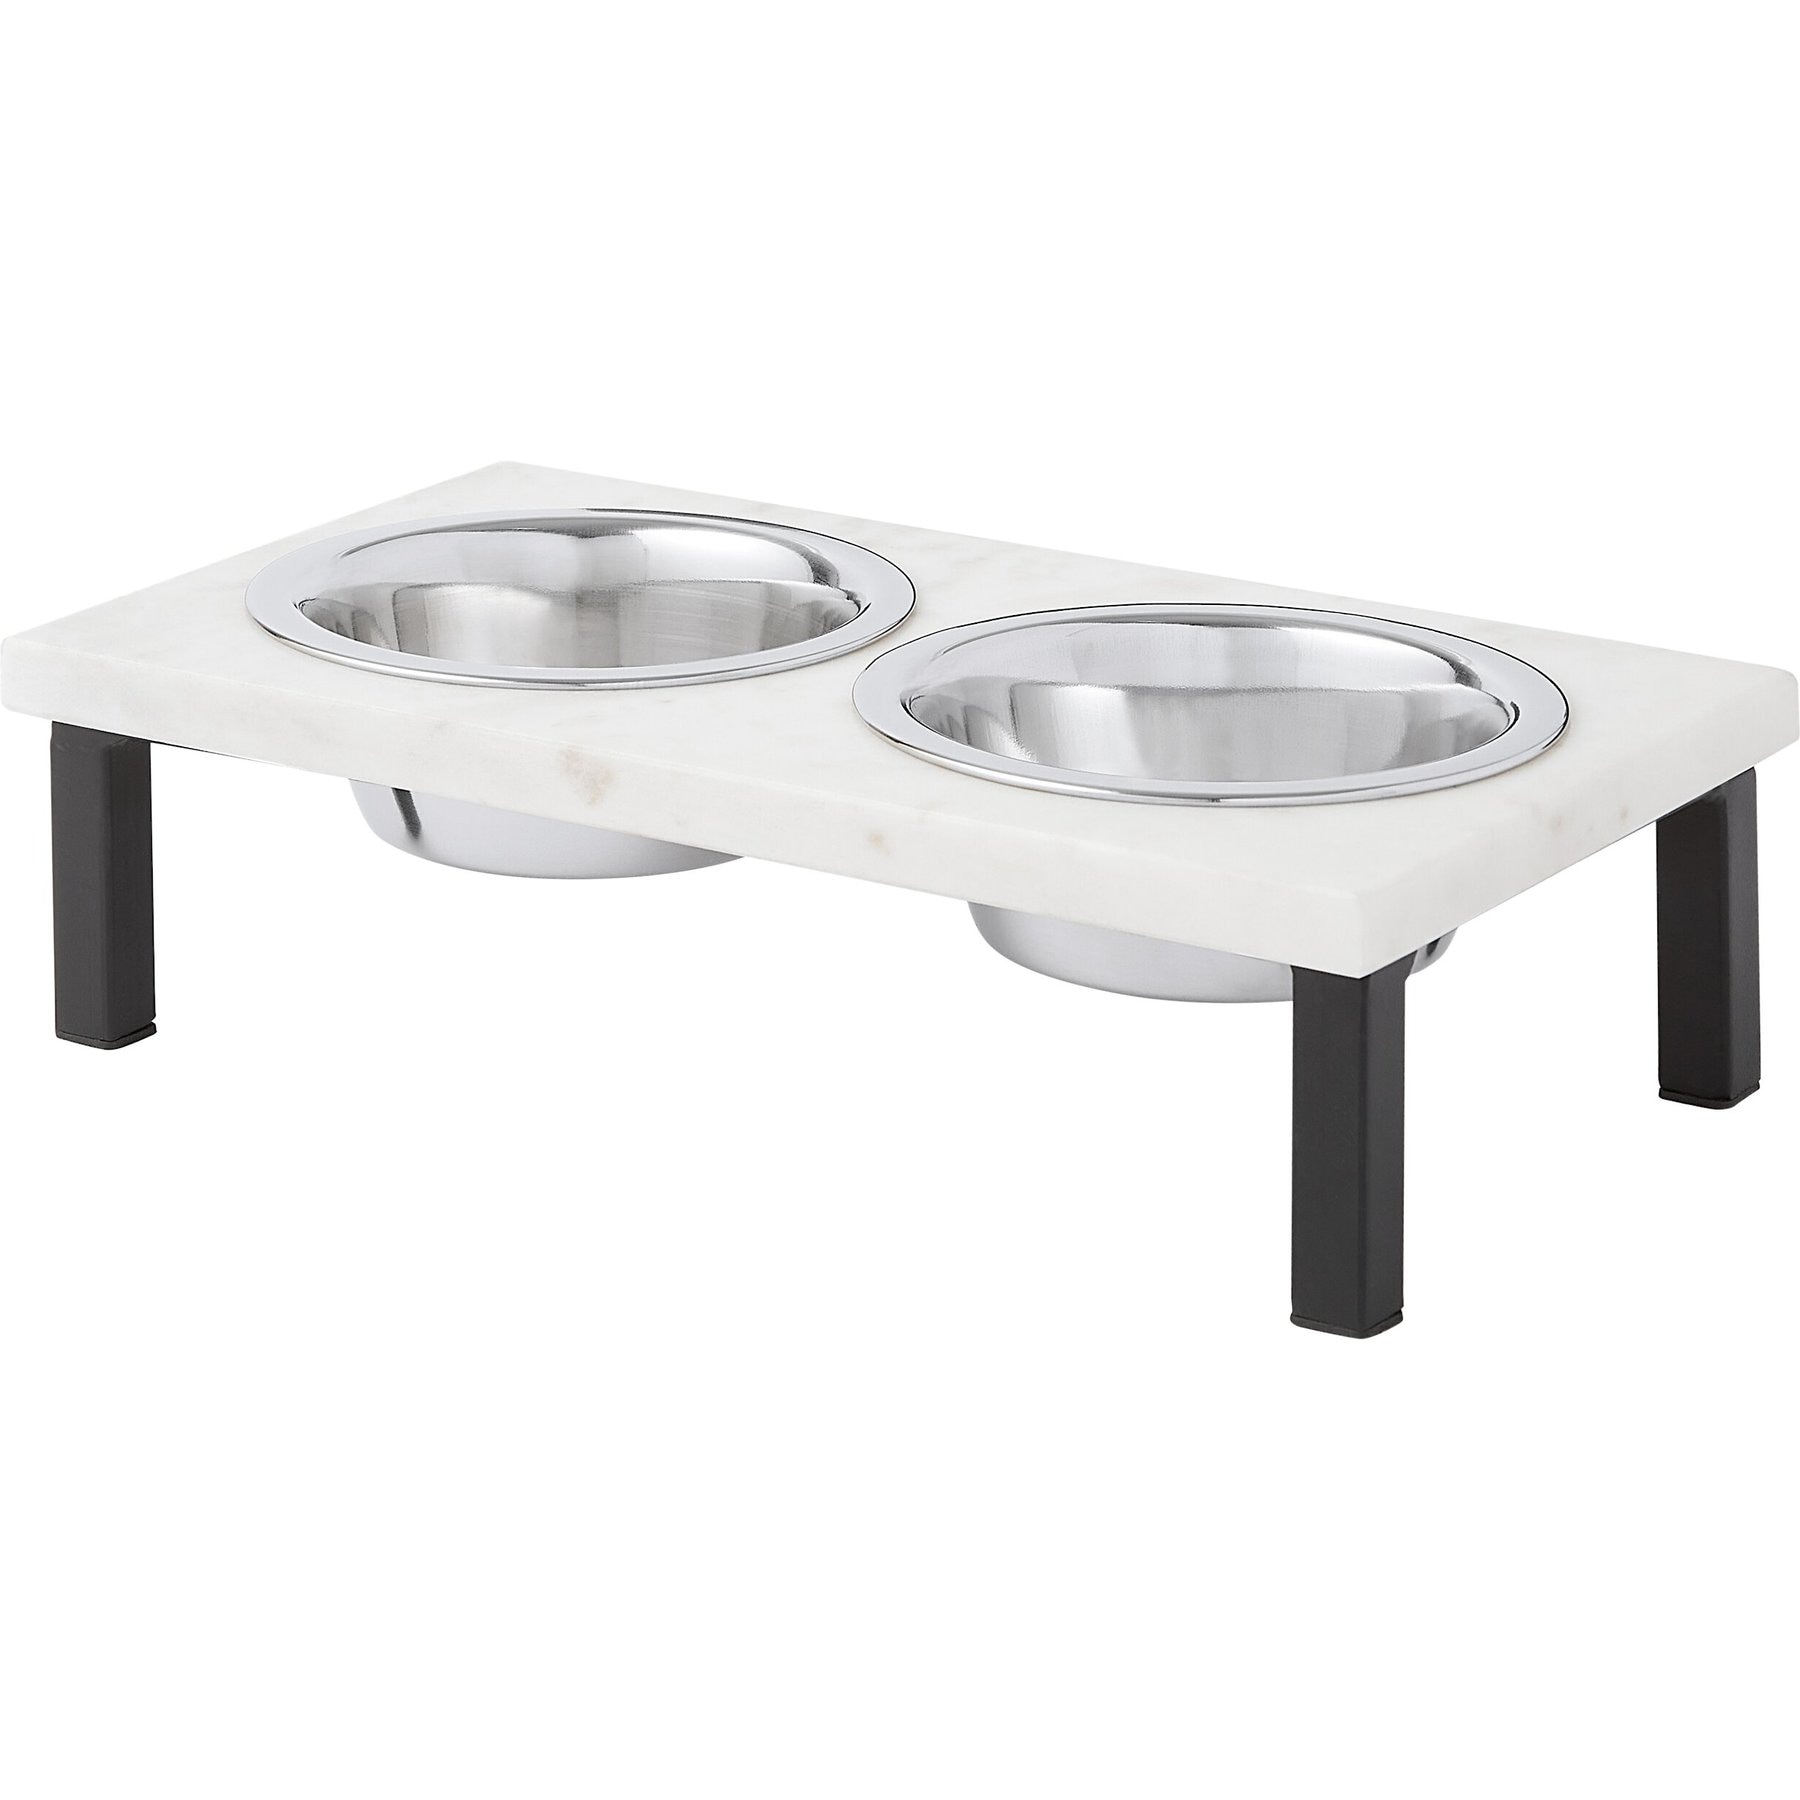 Two bowl Elevated raised dog feeder with stained sealer-Dog bowl